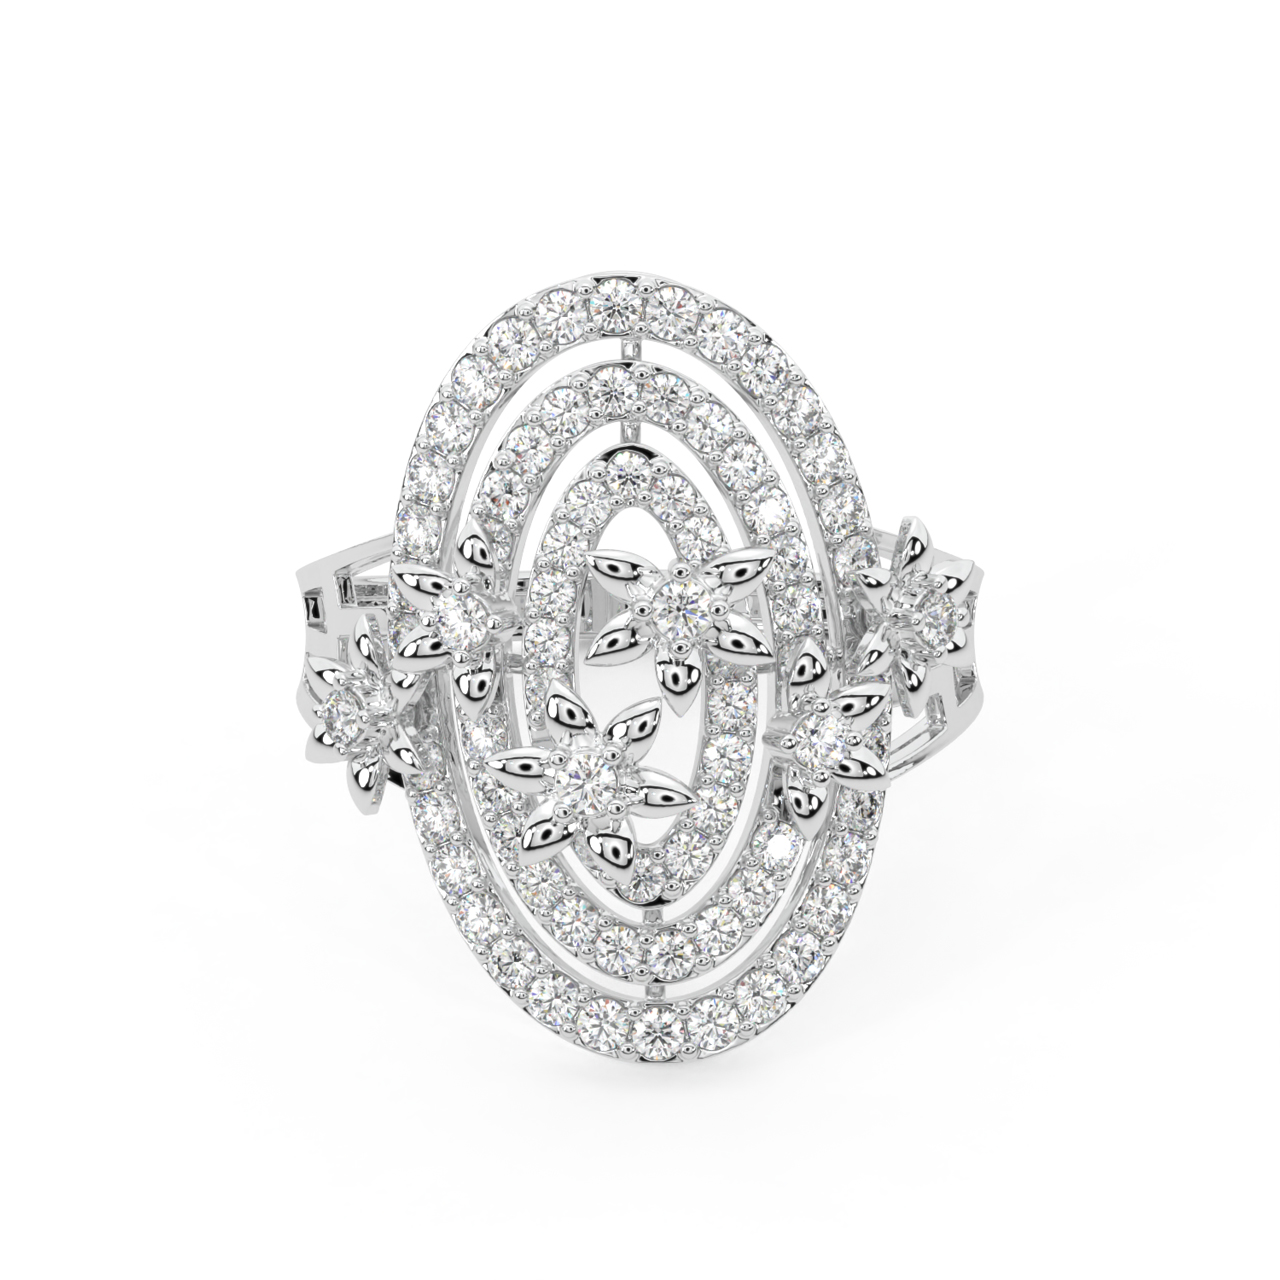 Oval Floral Design Diamond Ring